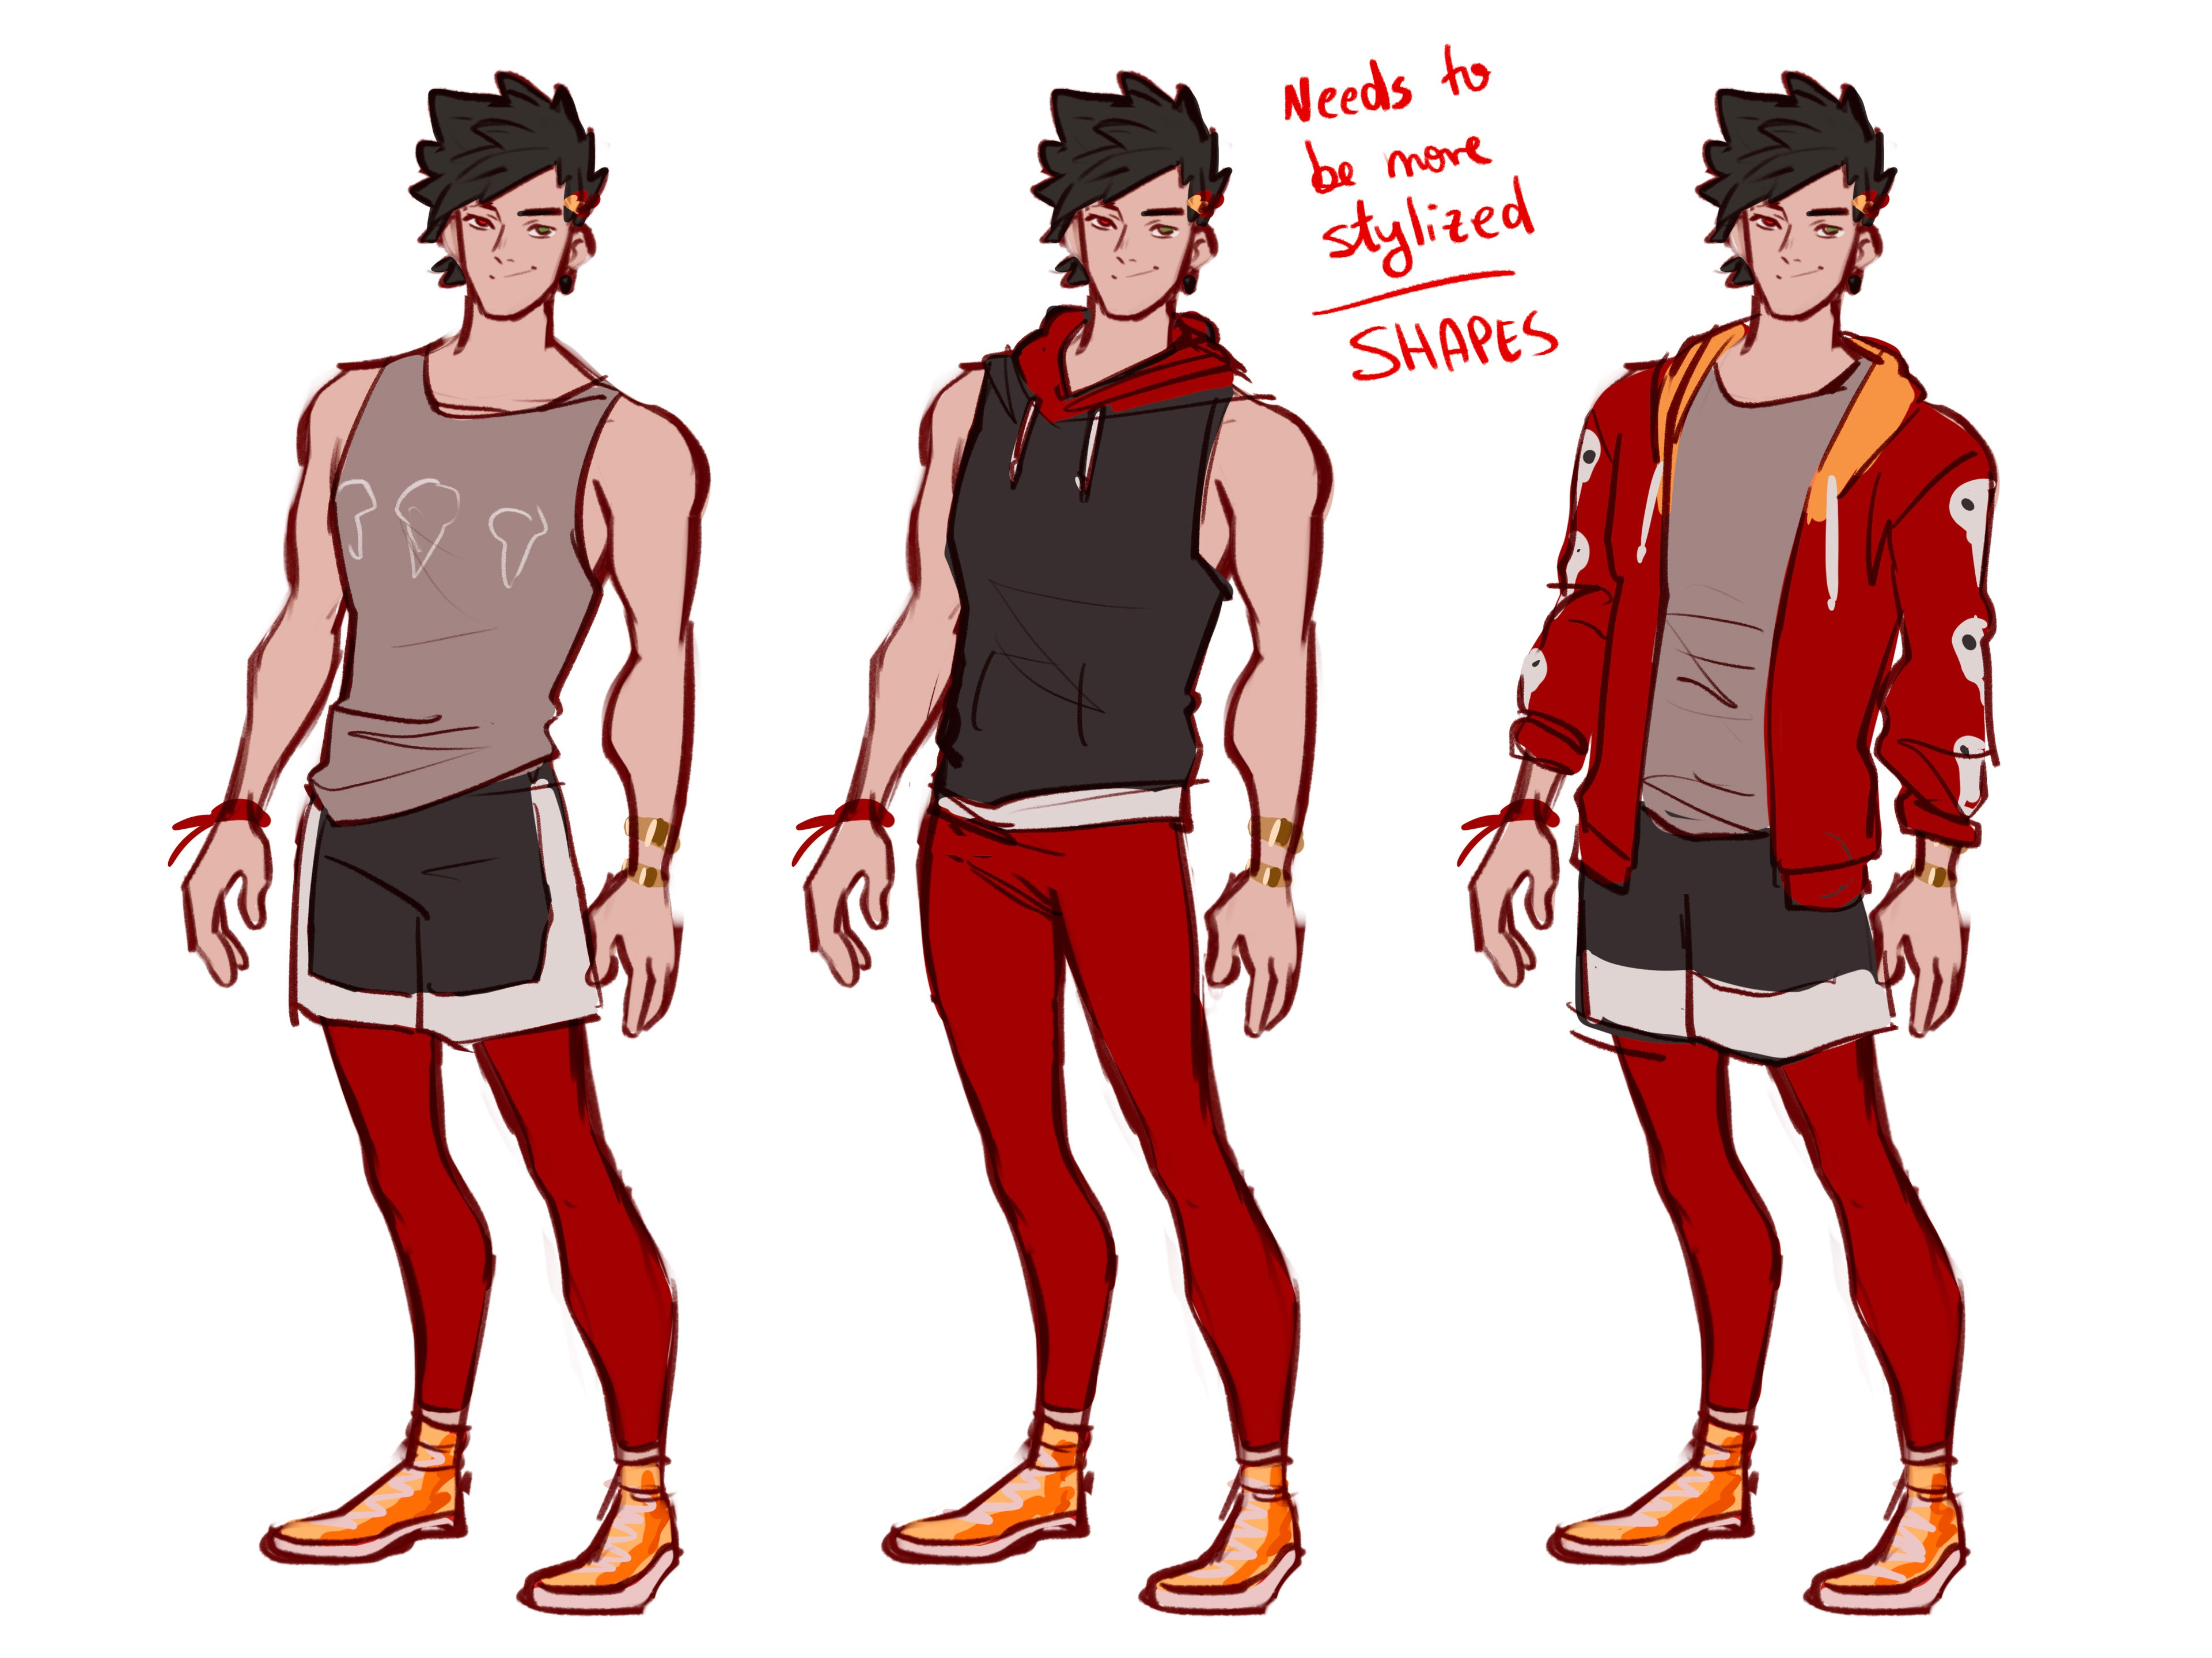 A lot of the other contributors were drawing Zagreus, so I really wanted to show off my high school version of him. With the red leggings and flame vans, trying to make a call back to his design in the game.